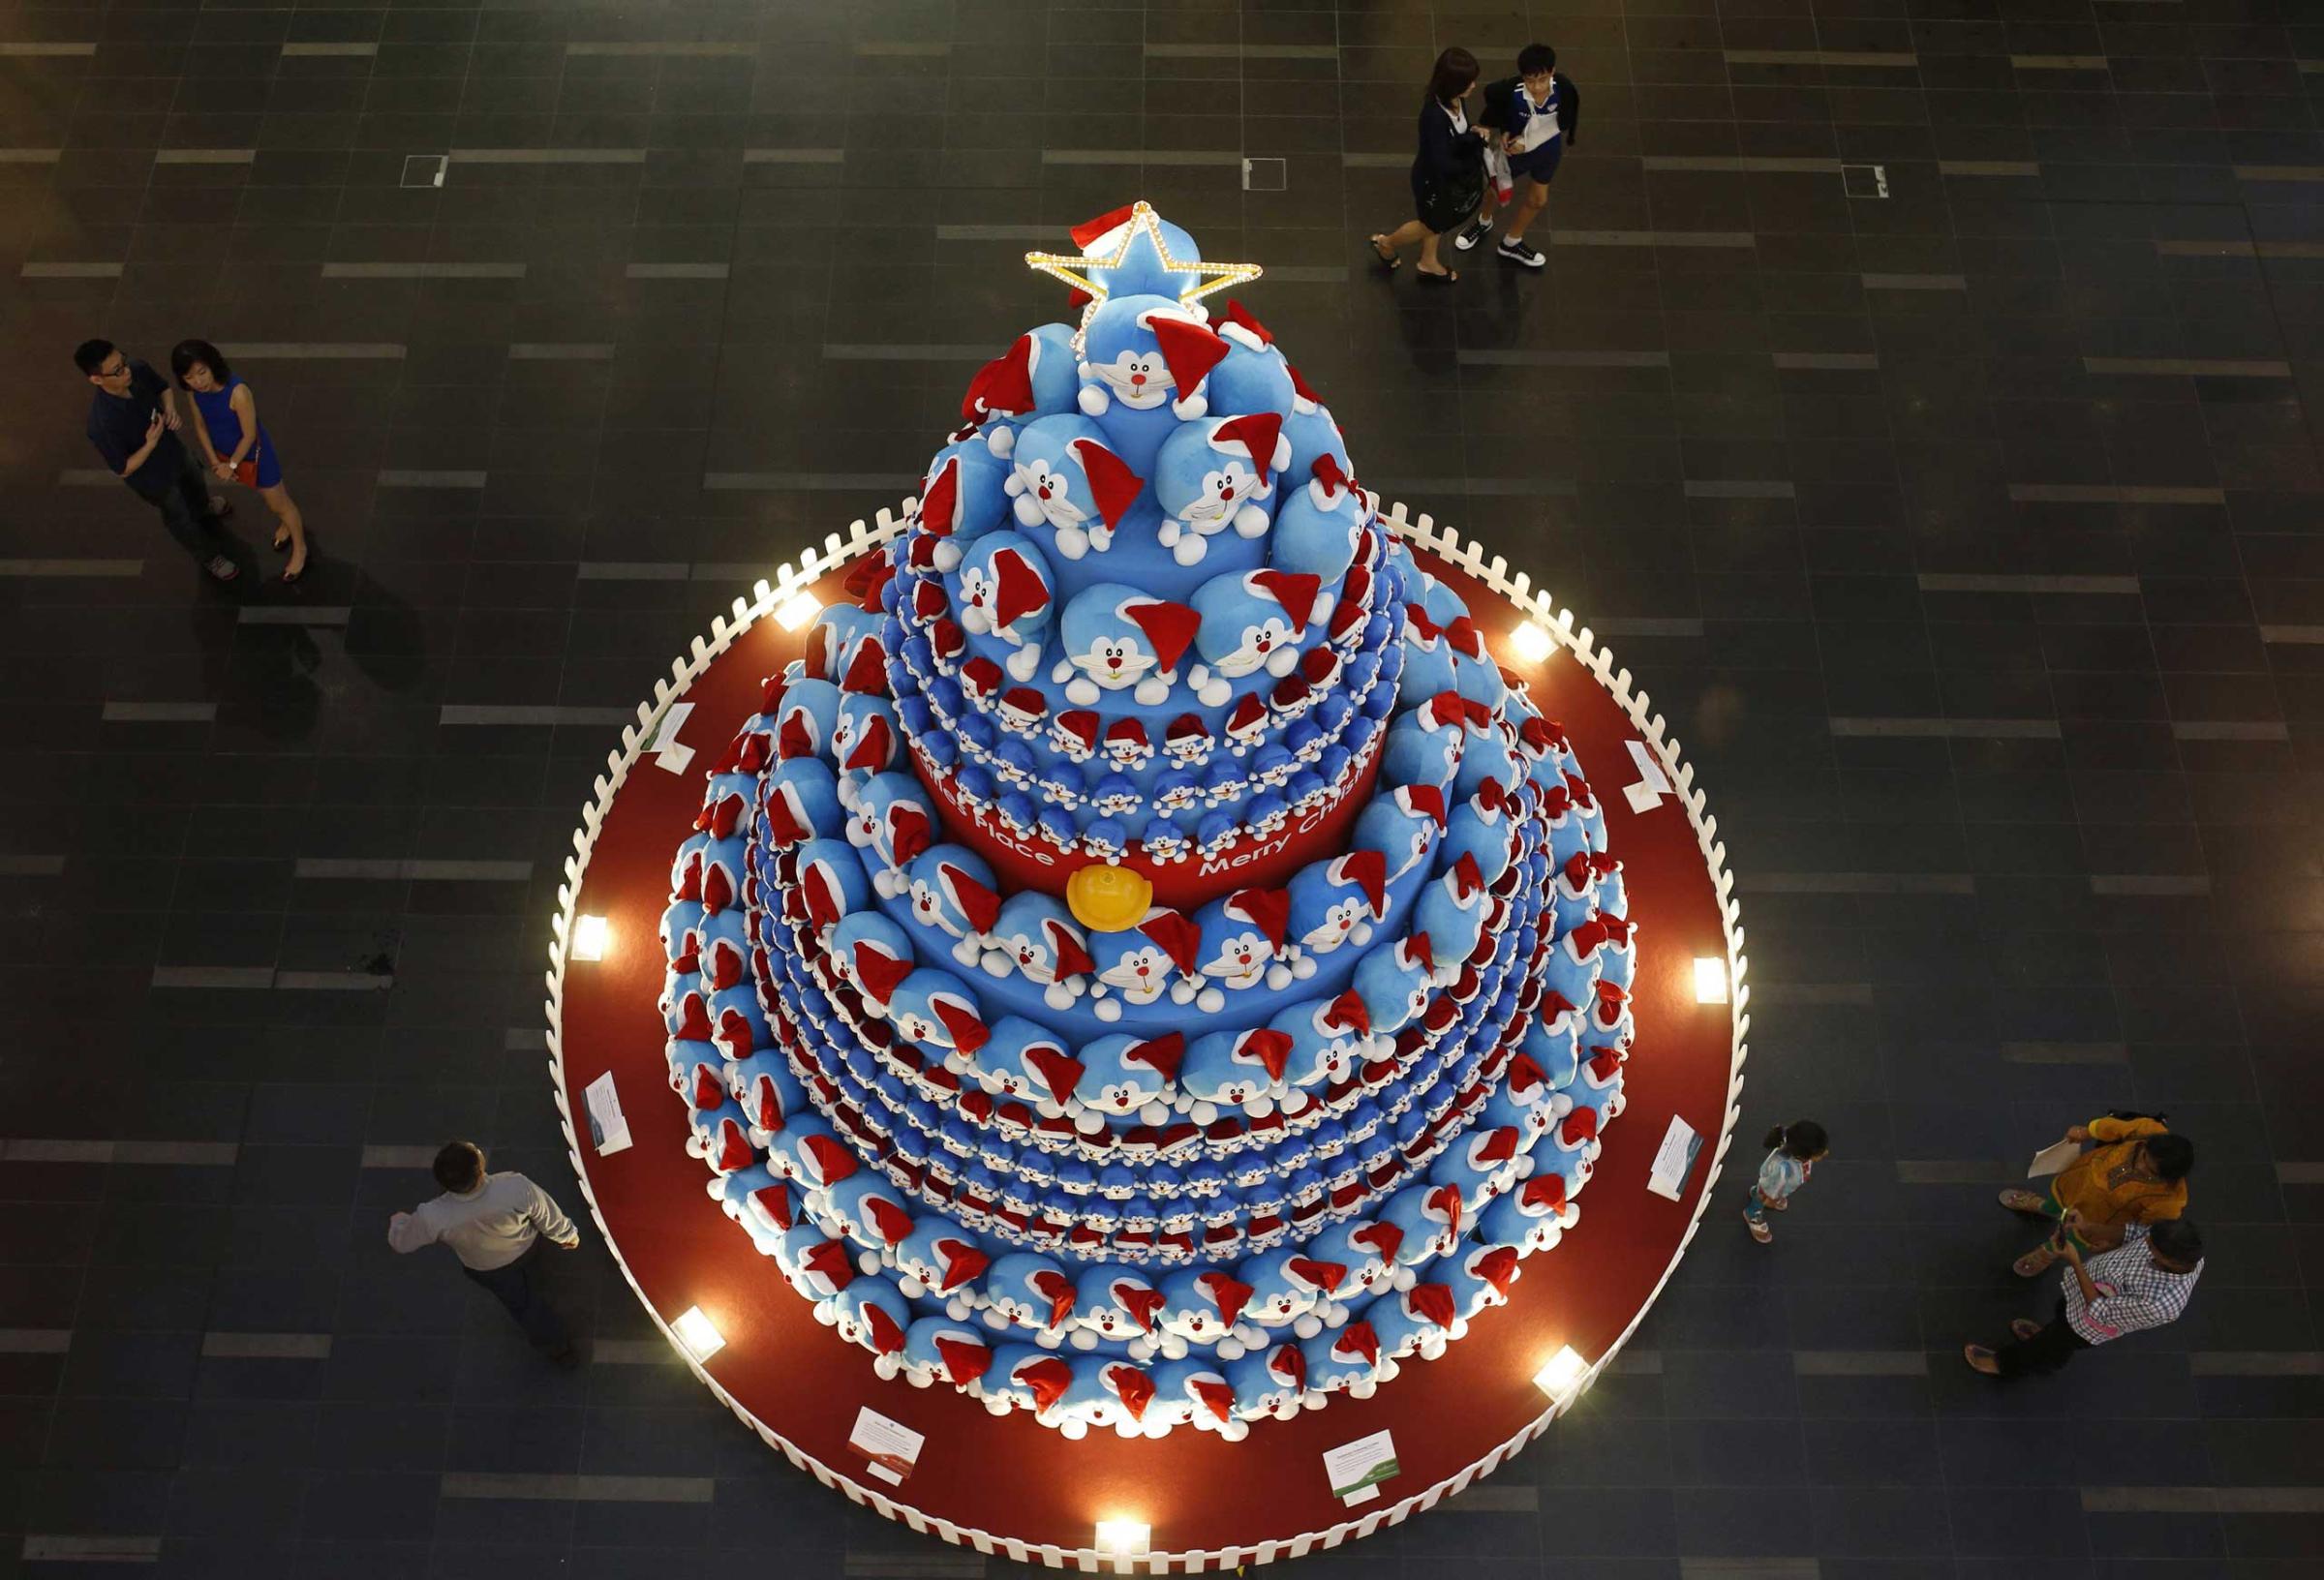 People take photos of a Christmas tree made up of Japanese Manga character Doraemon at a shopping mall in Singapore